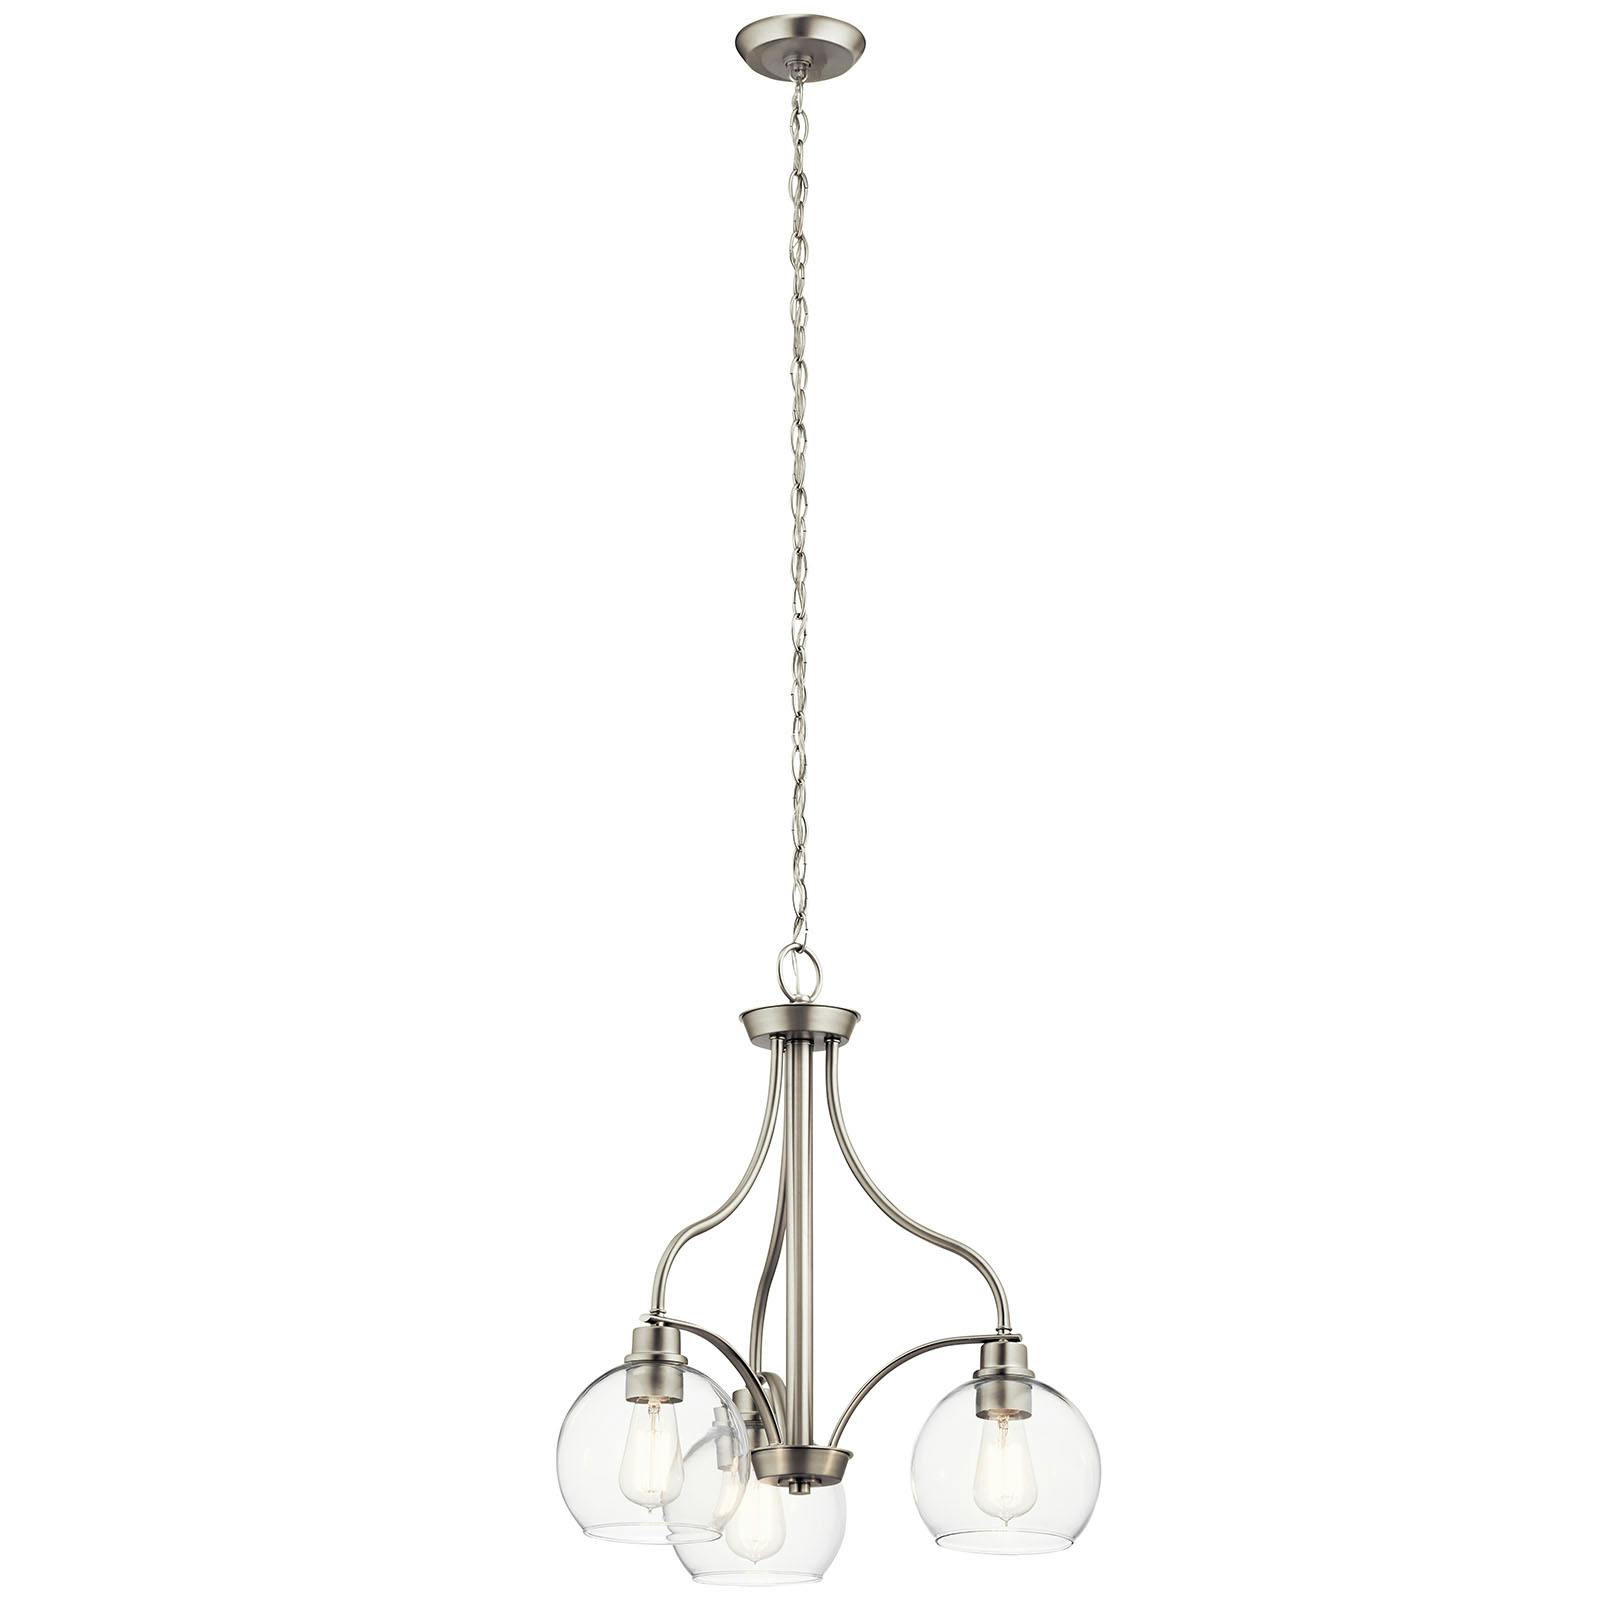 Harmony 3 Light Chandelier Brushed Nickel on a white background